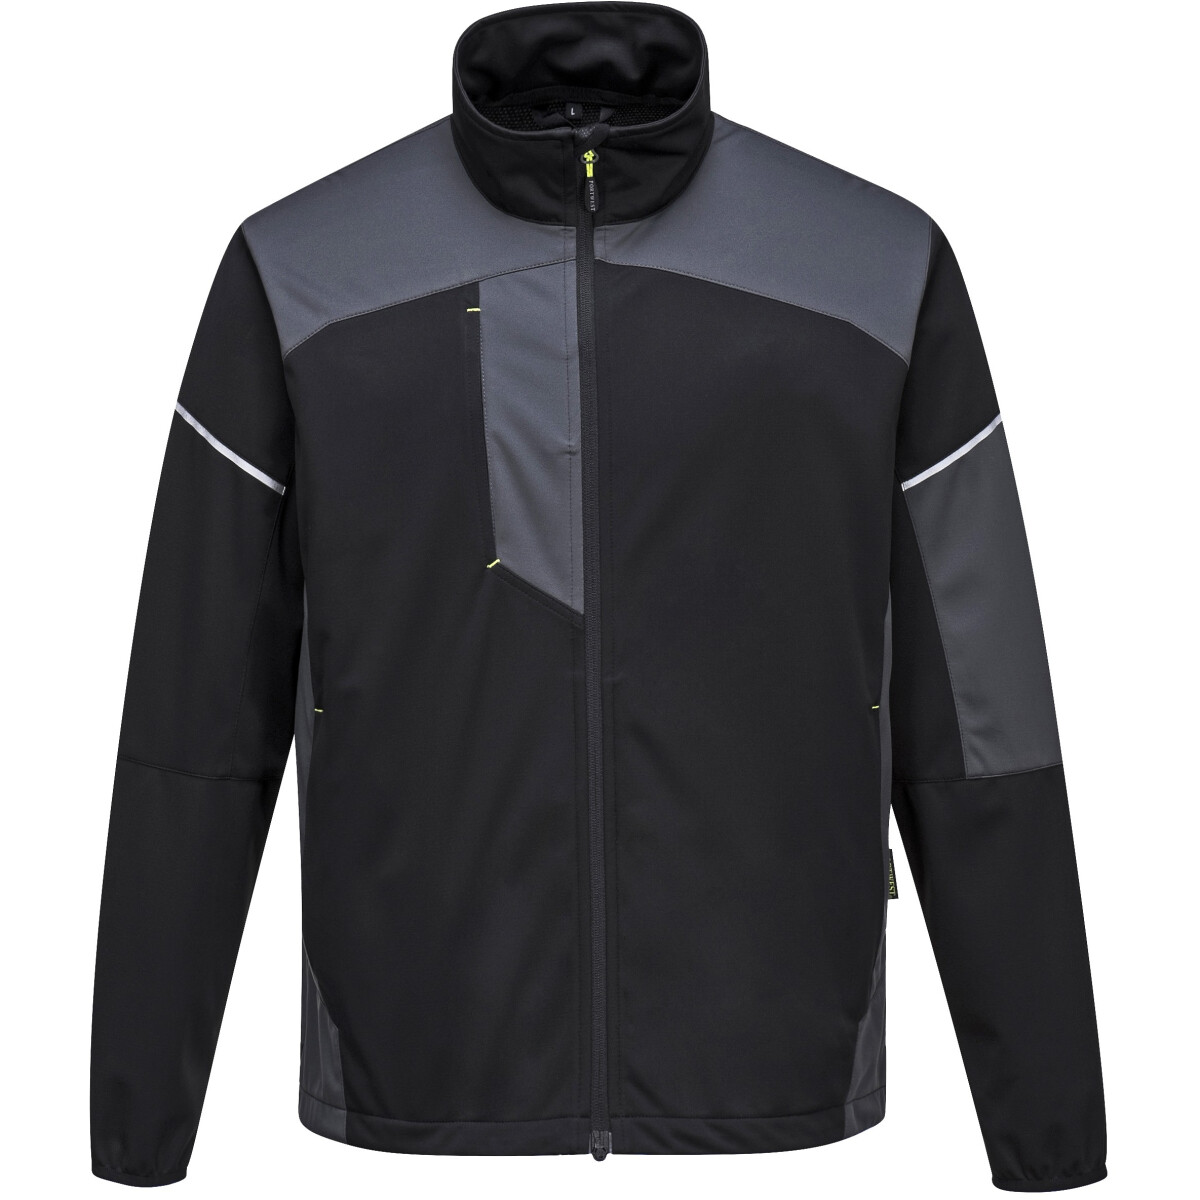 Portwest T620 PW3 Flex Shell Jacket from Lawson HIS